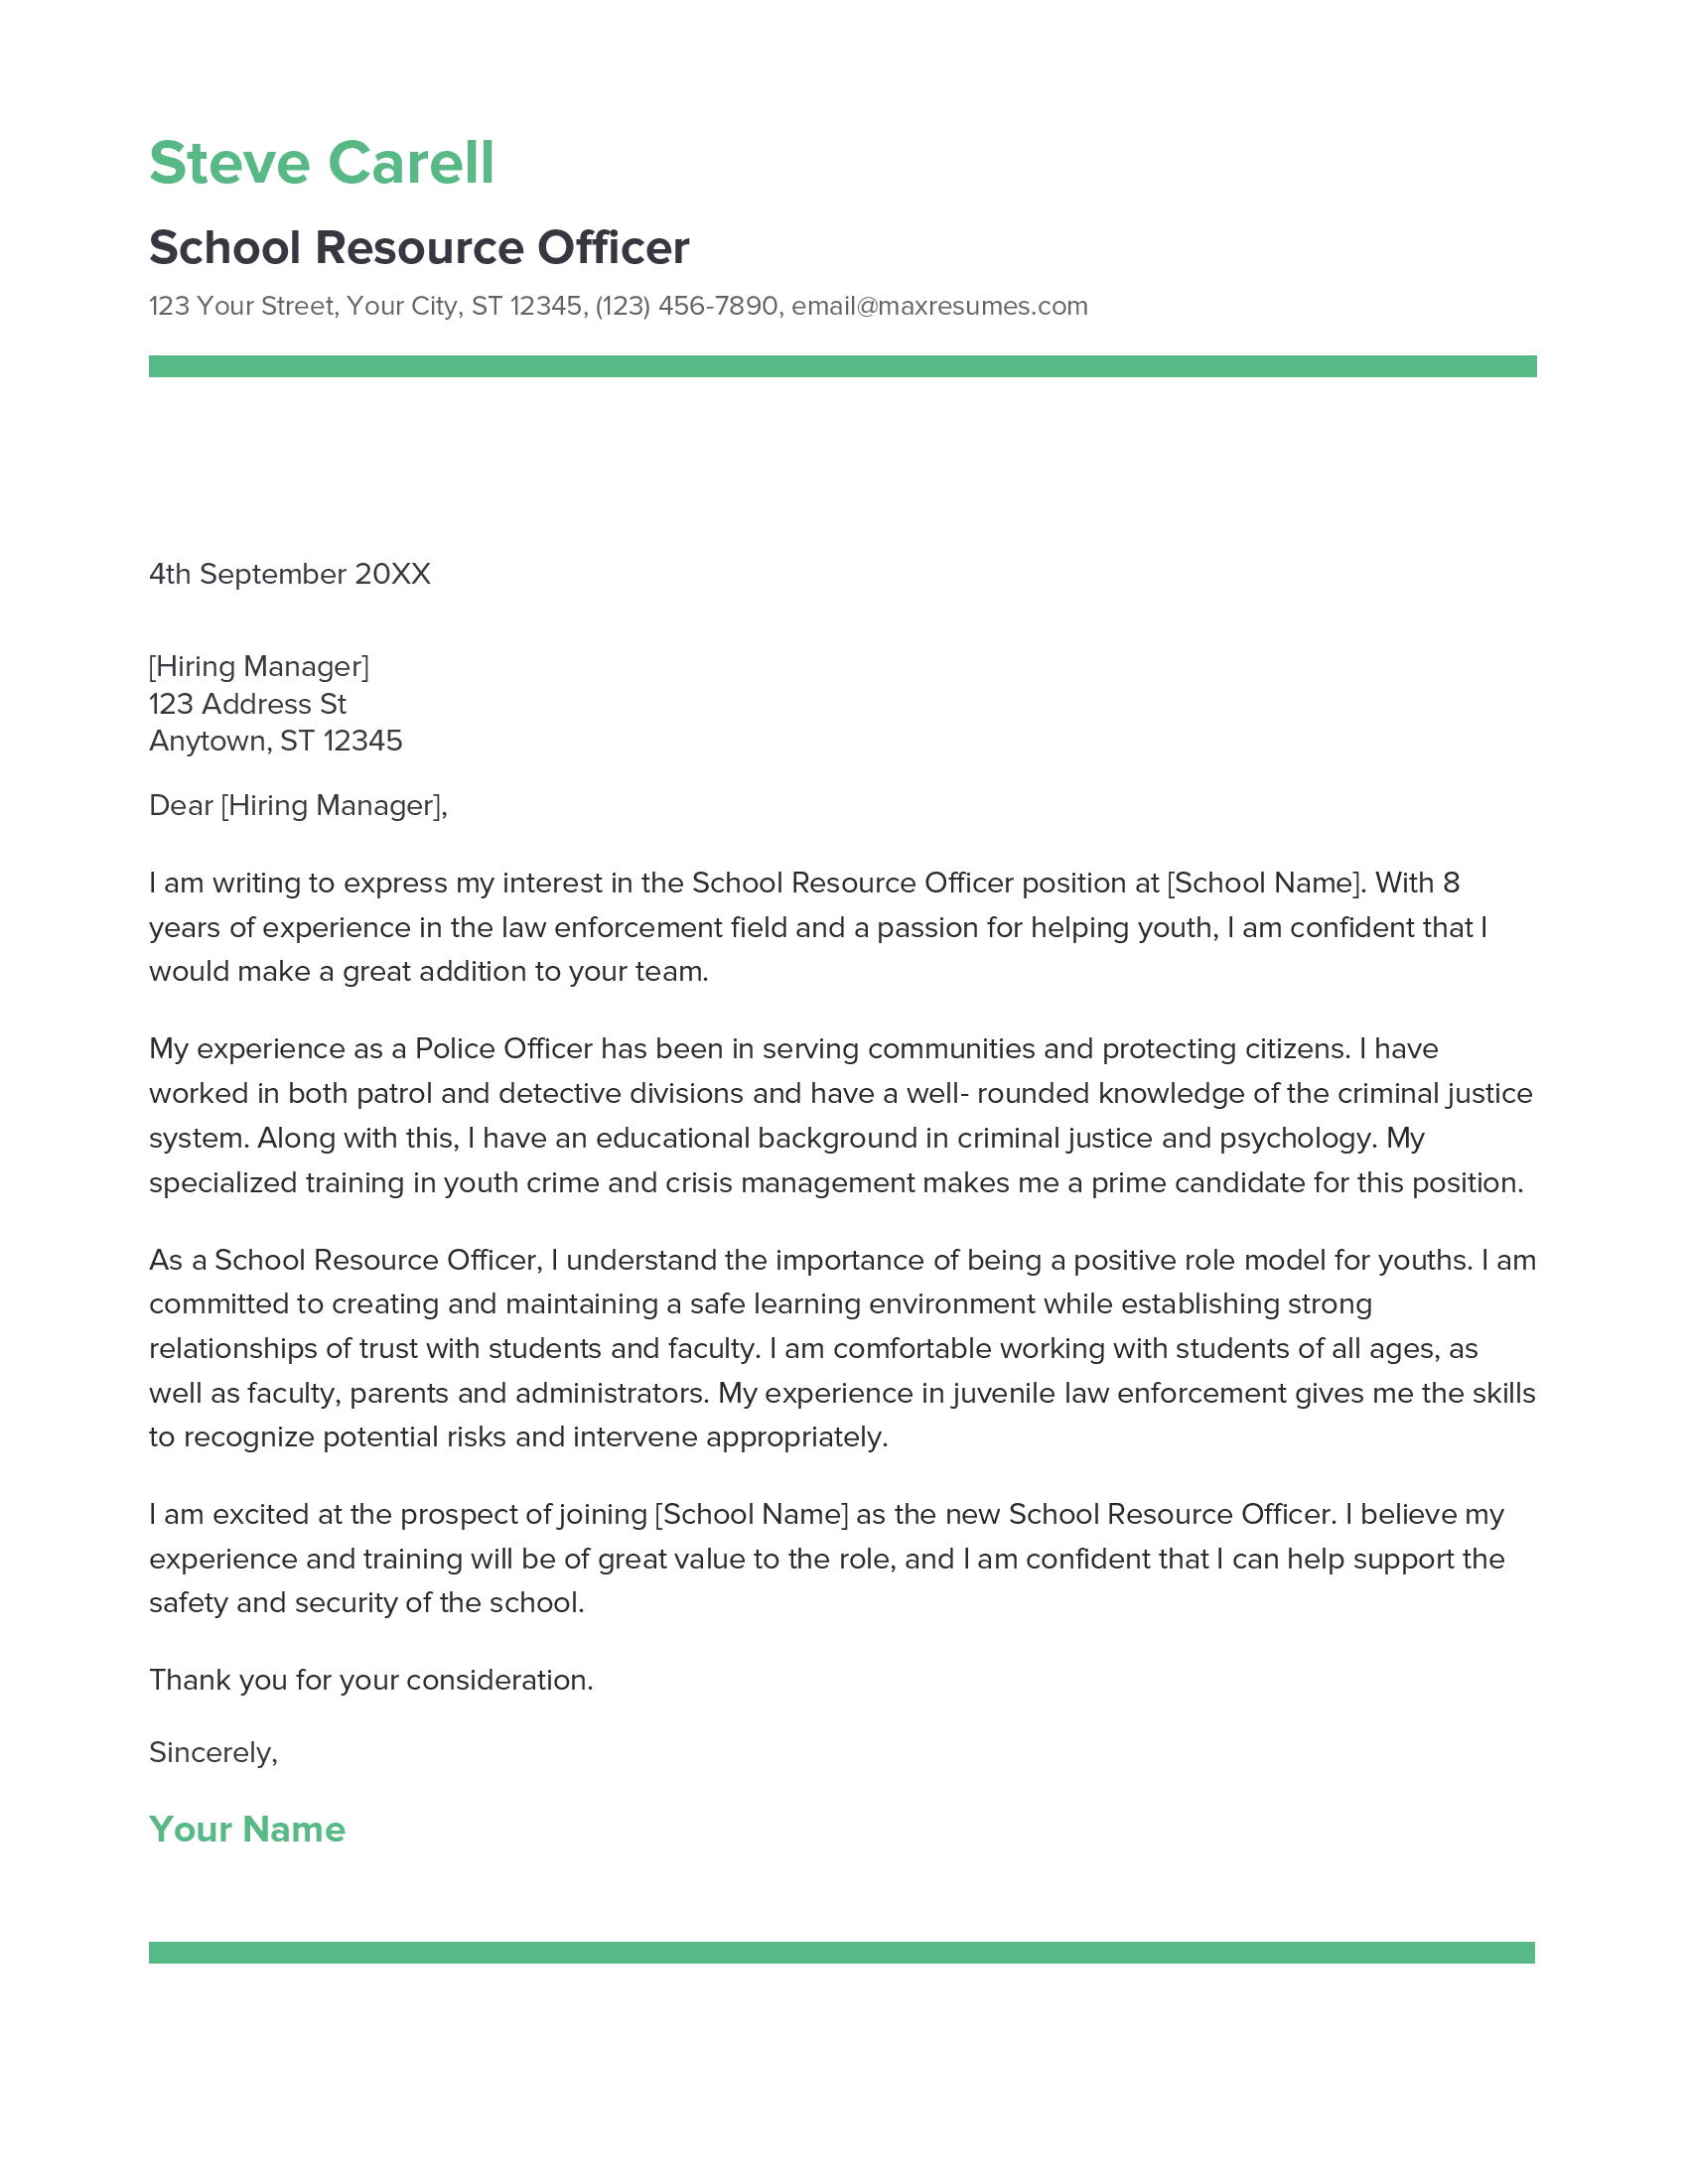 School Resource Officer Cover Letter Example